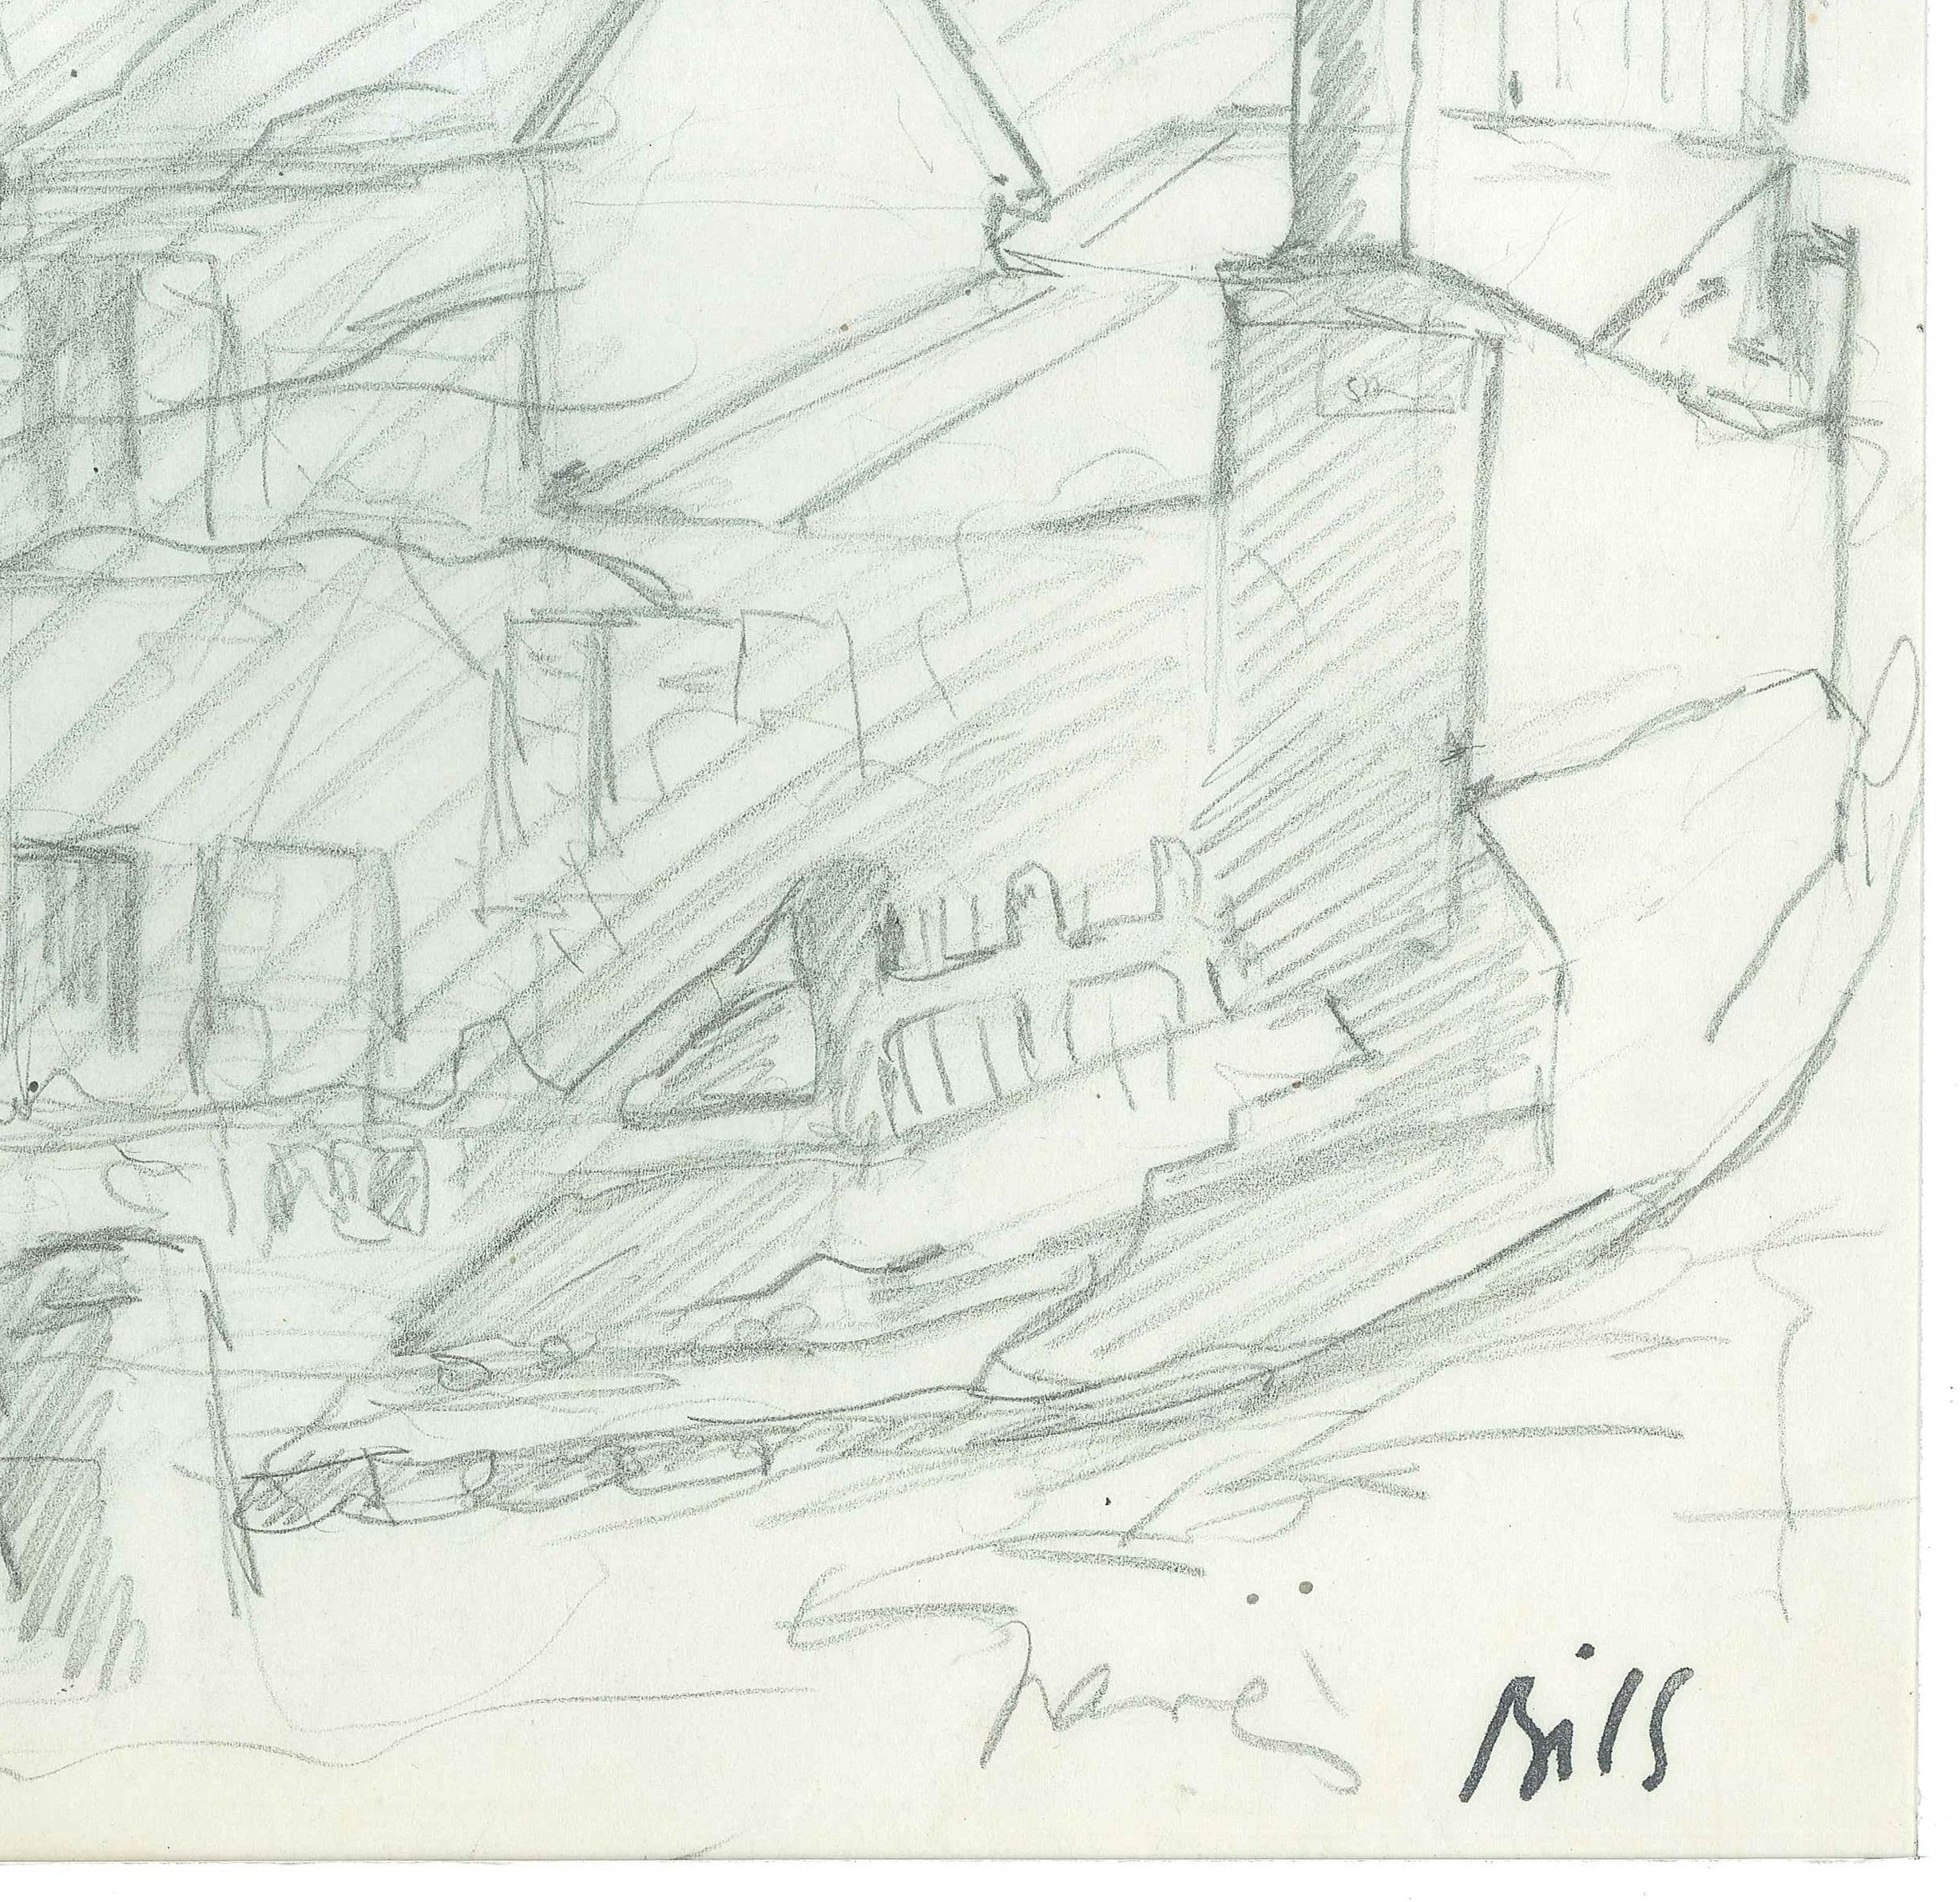 Household is an original drawing in pencil on paper realized by an Claude Bils in 1950s

The State of preservation is good except for some small foldings.

signed on the lower right.

Passepartout included 40.5 x 33.5

The artwork represents the